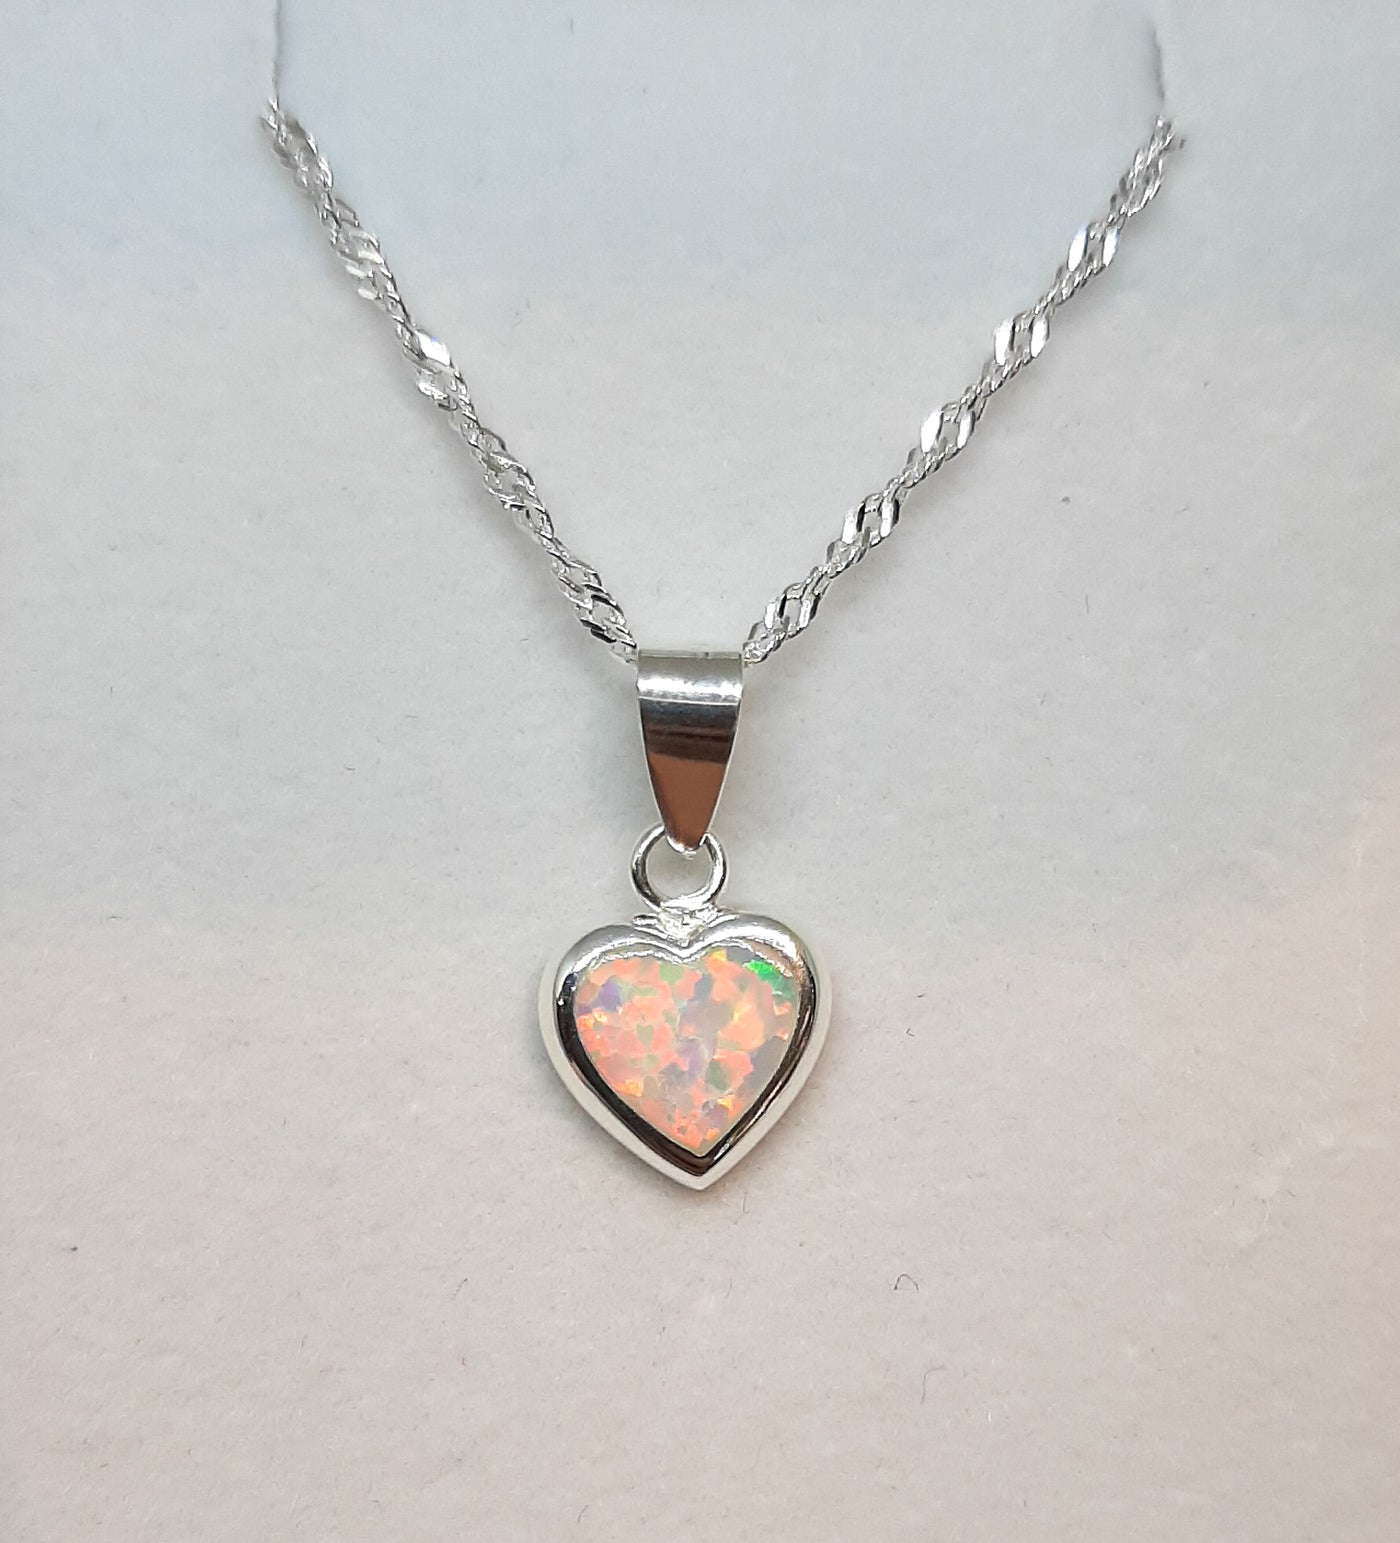 Silver & white opal heart pendant on silver twisted chain